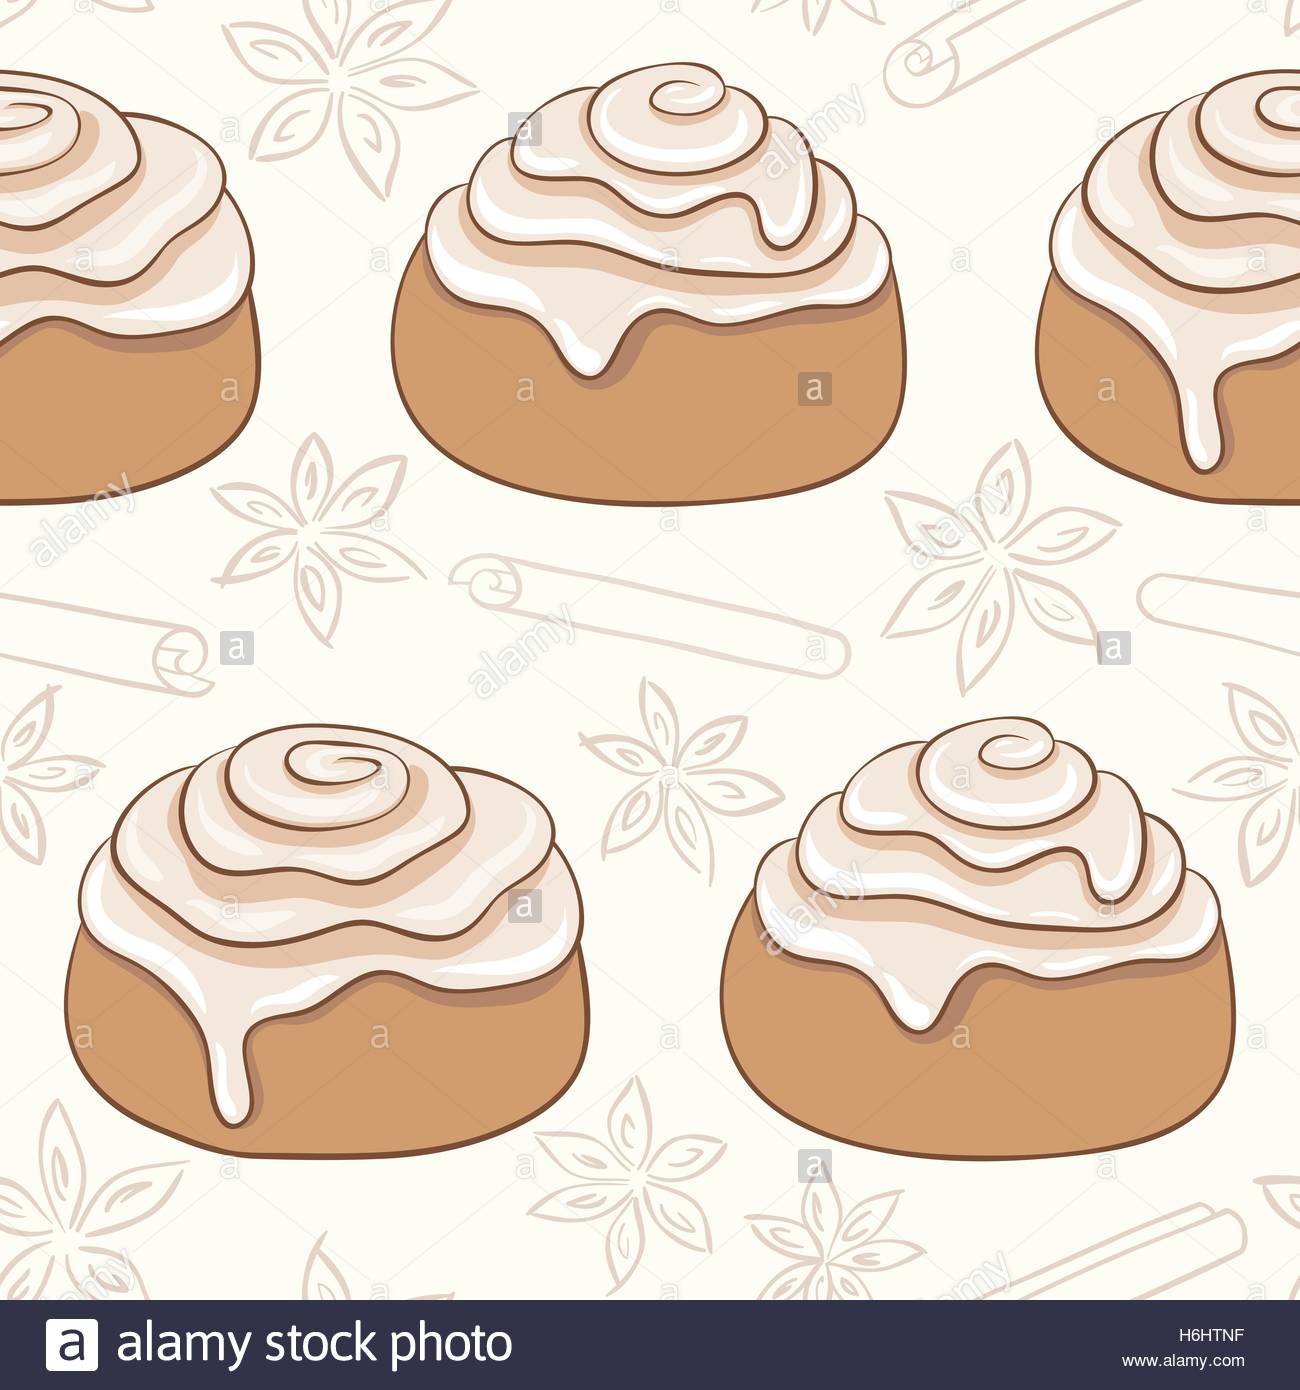 baked goods clipart author's